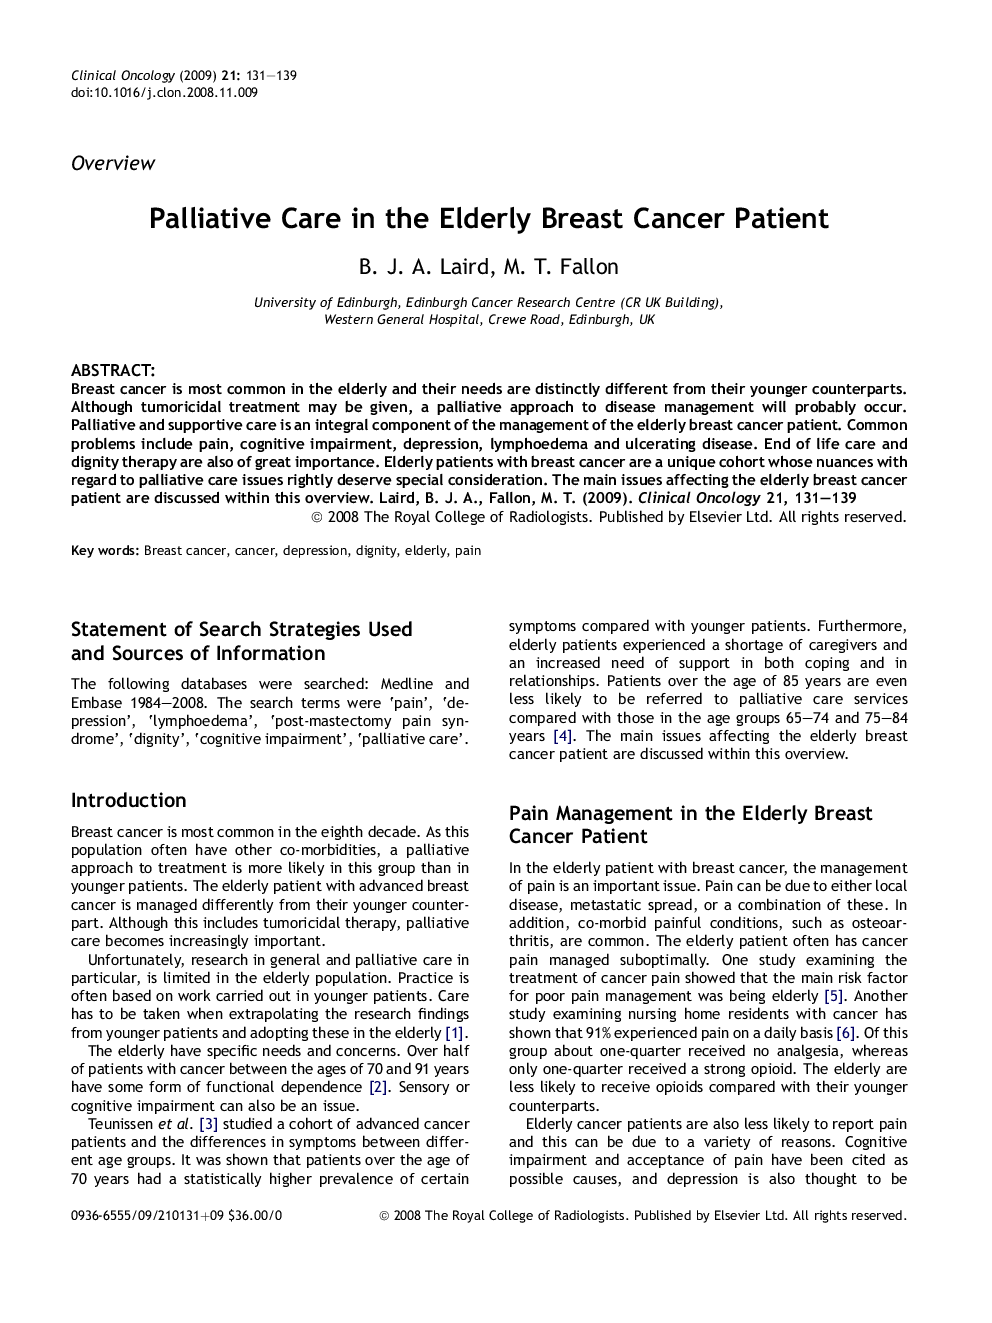 Palliative Care in the Elderly Breast Cancer Patient